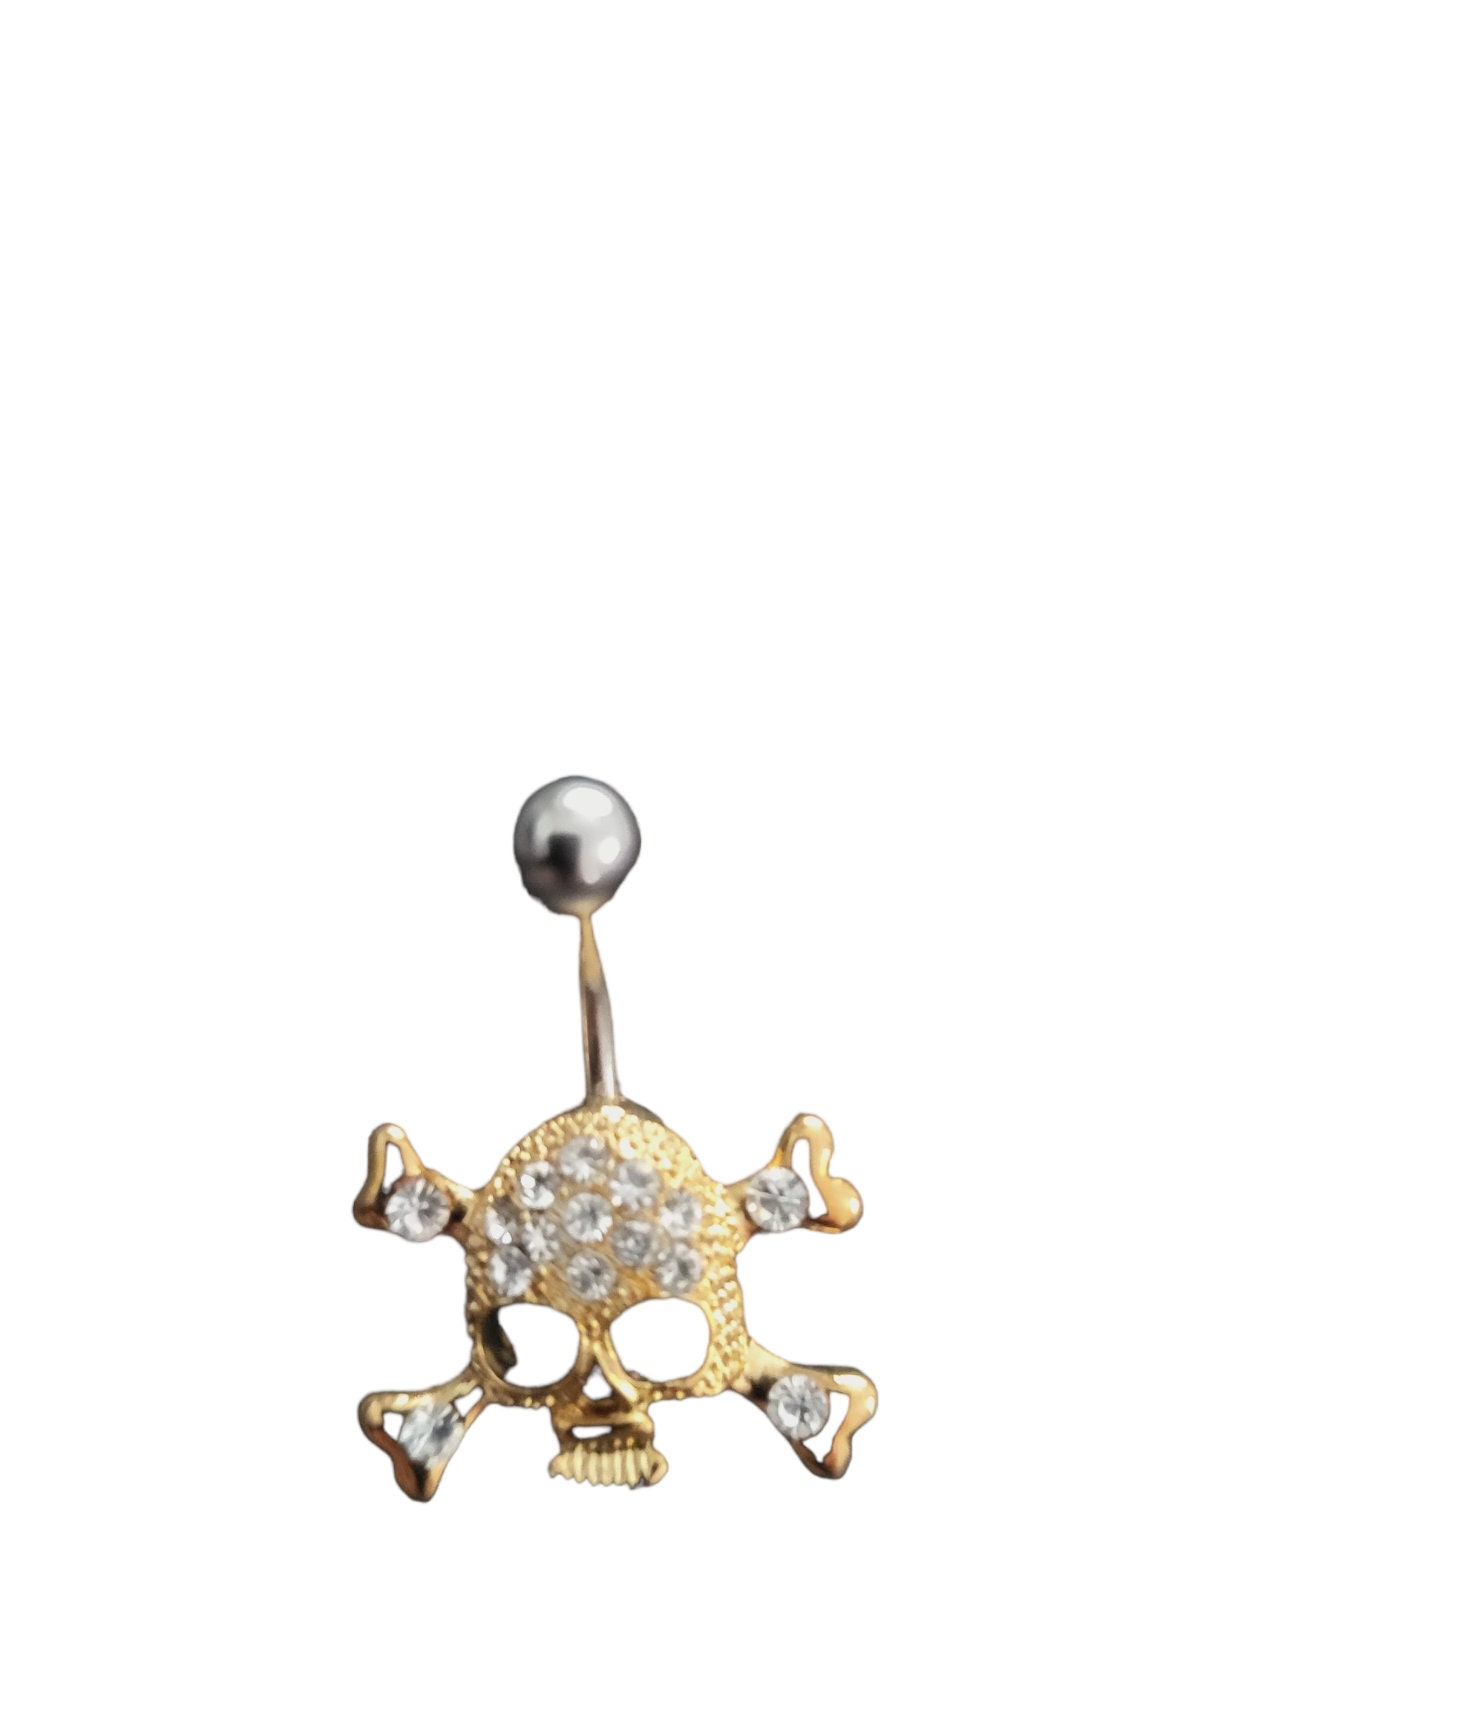 $8 jewels available on .de  Belly button piercing rings, Belly  piercing ring, Body jewelry piercing